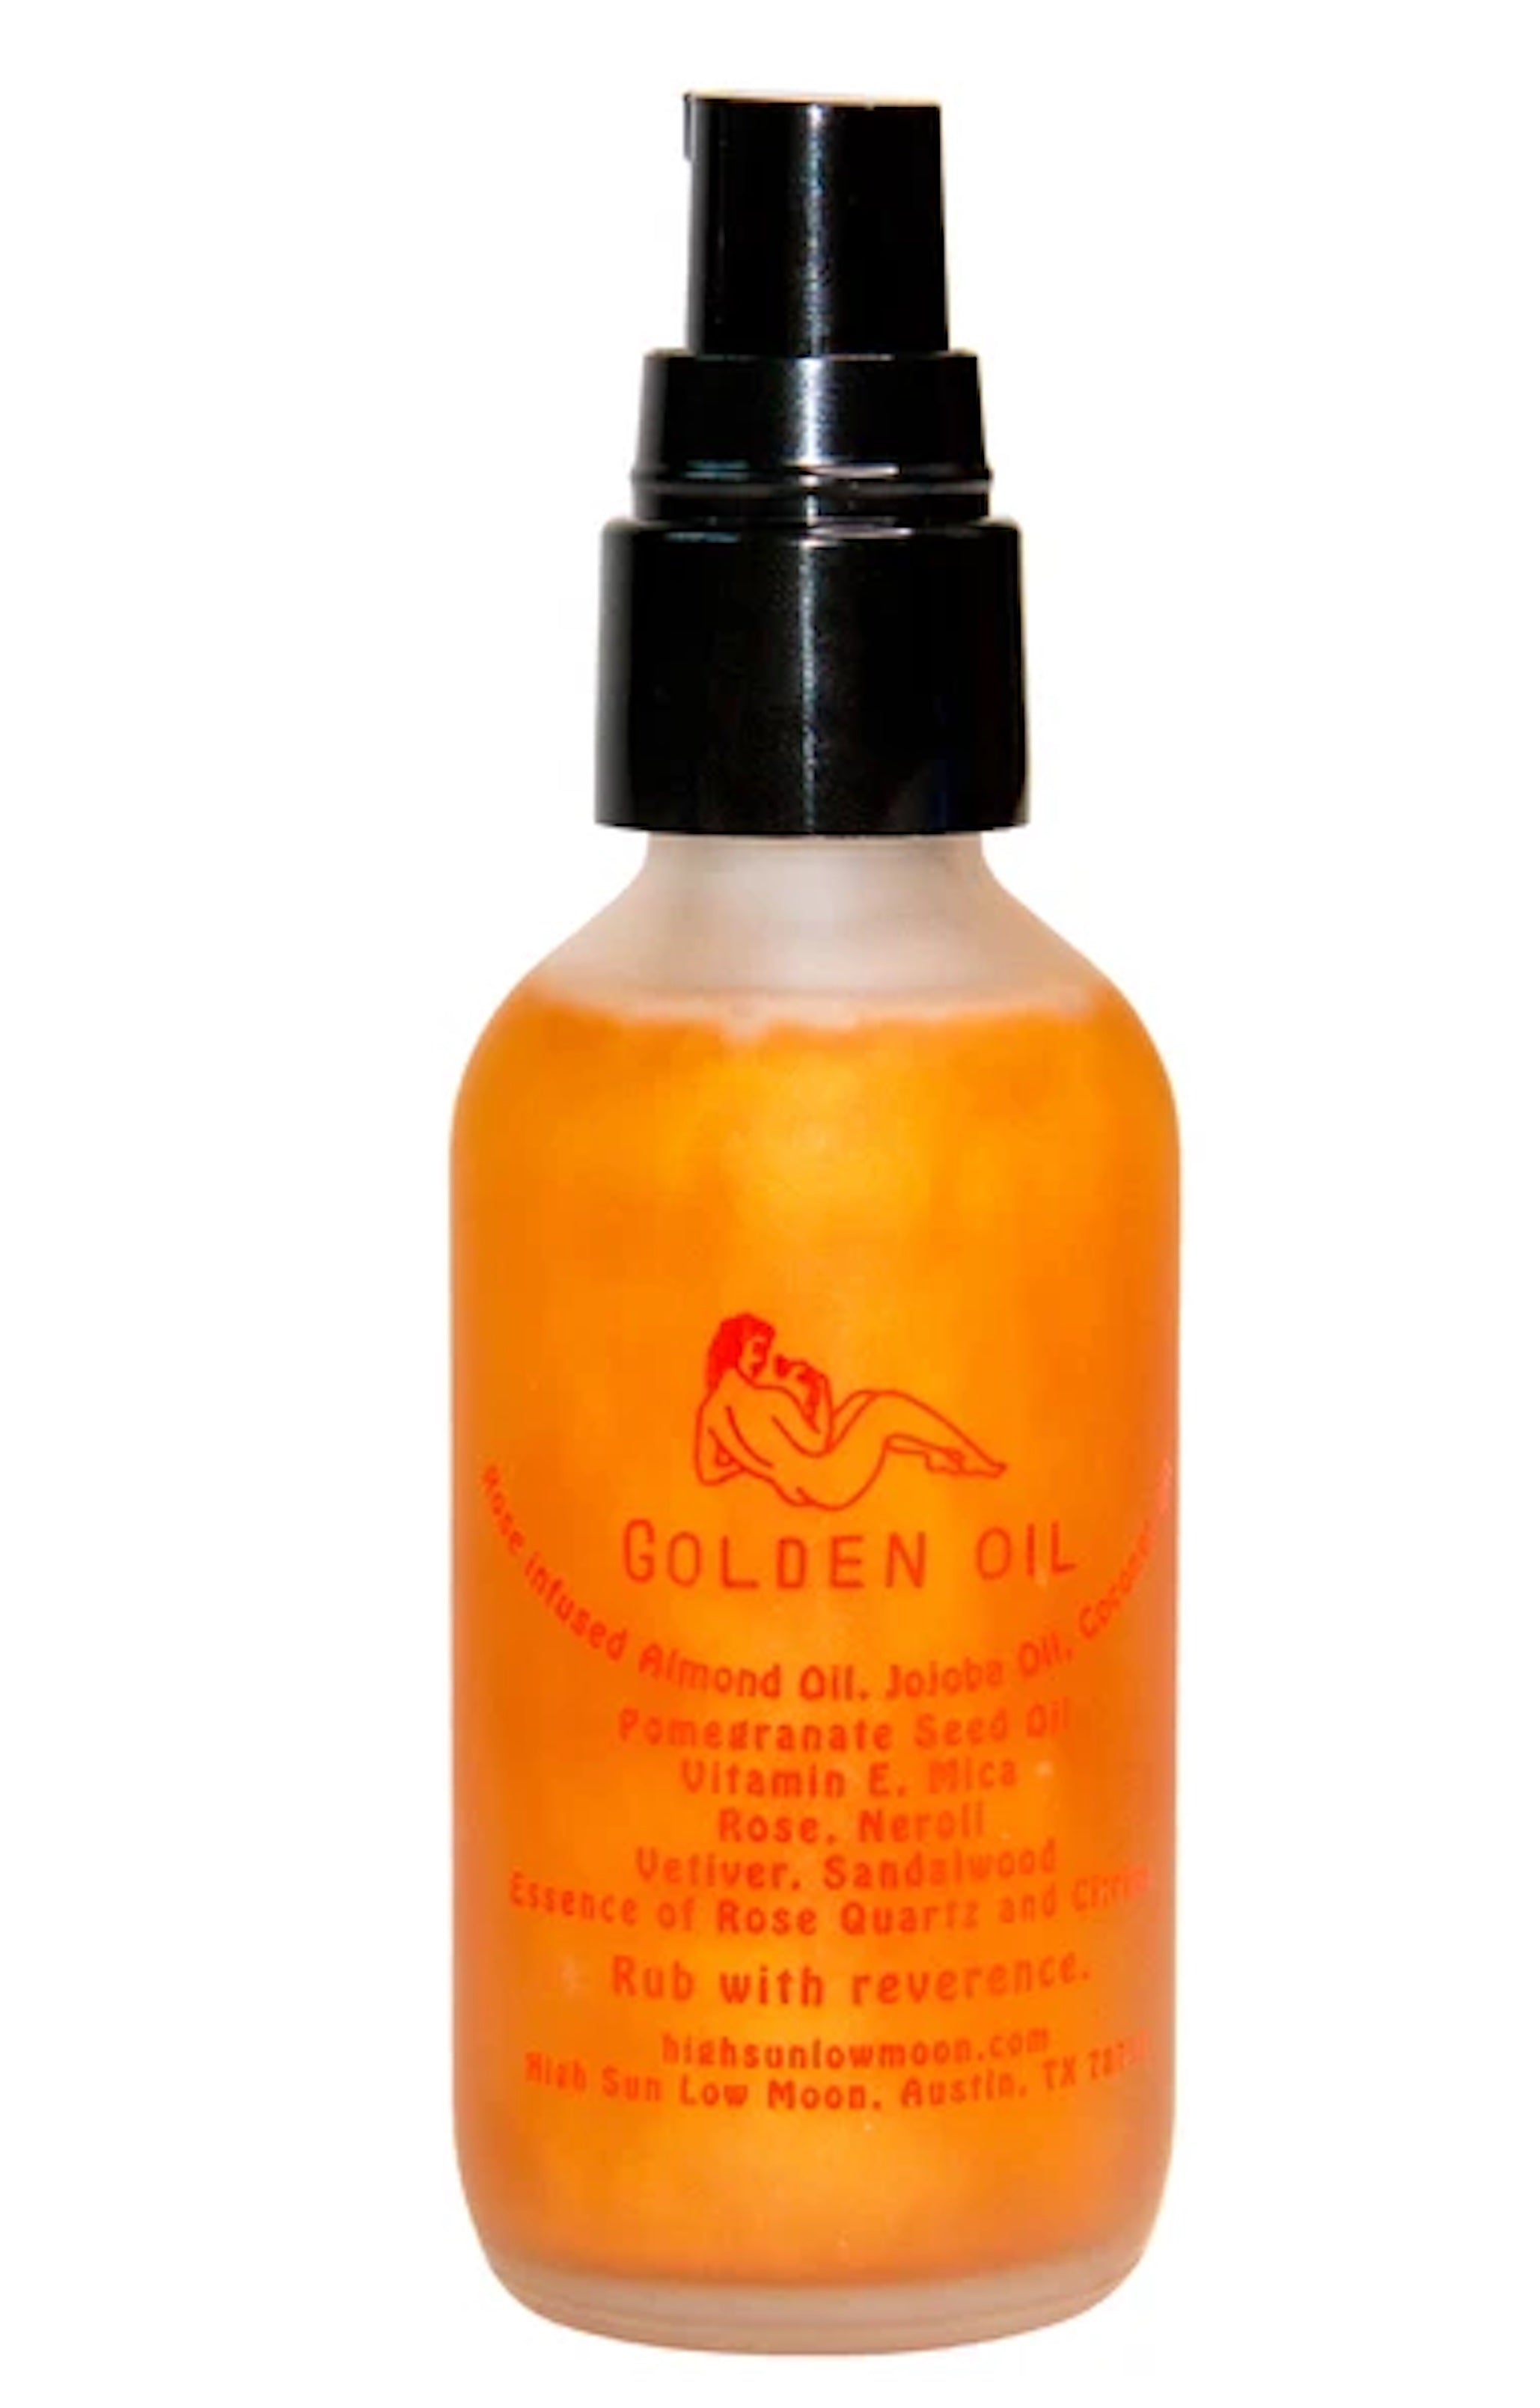 orange massage oil from high sun low moon depicted